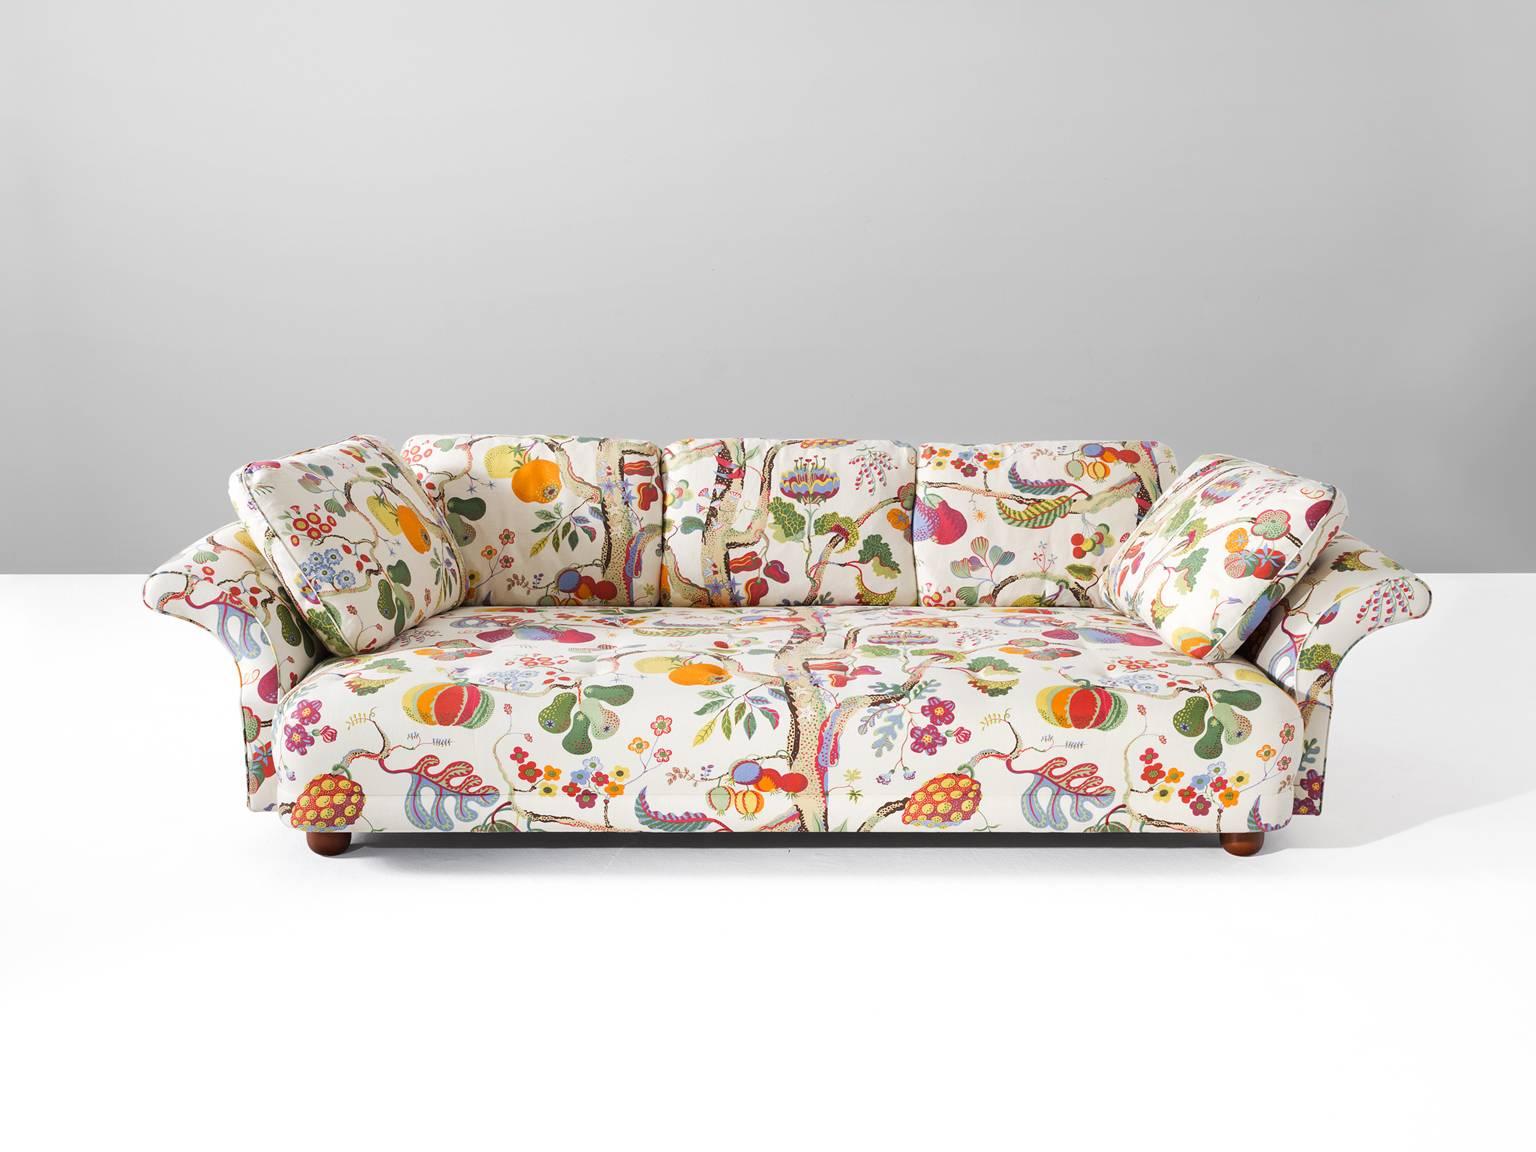 Liljevalchs sofa, in fabric and wood, by Josef Frank, Sweden, 1934. 

Exceptional sofa in striking colorful upholstery by Josef Frank. This sofa was designed for the Liljevalchs Konsthall in 1934. A wide and highly comfortable sofa. Characterized